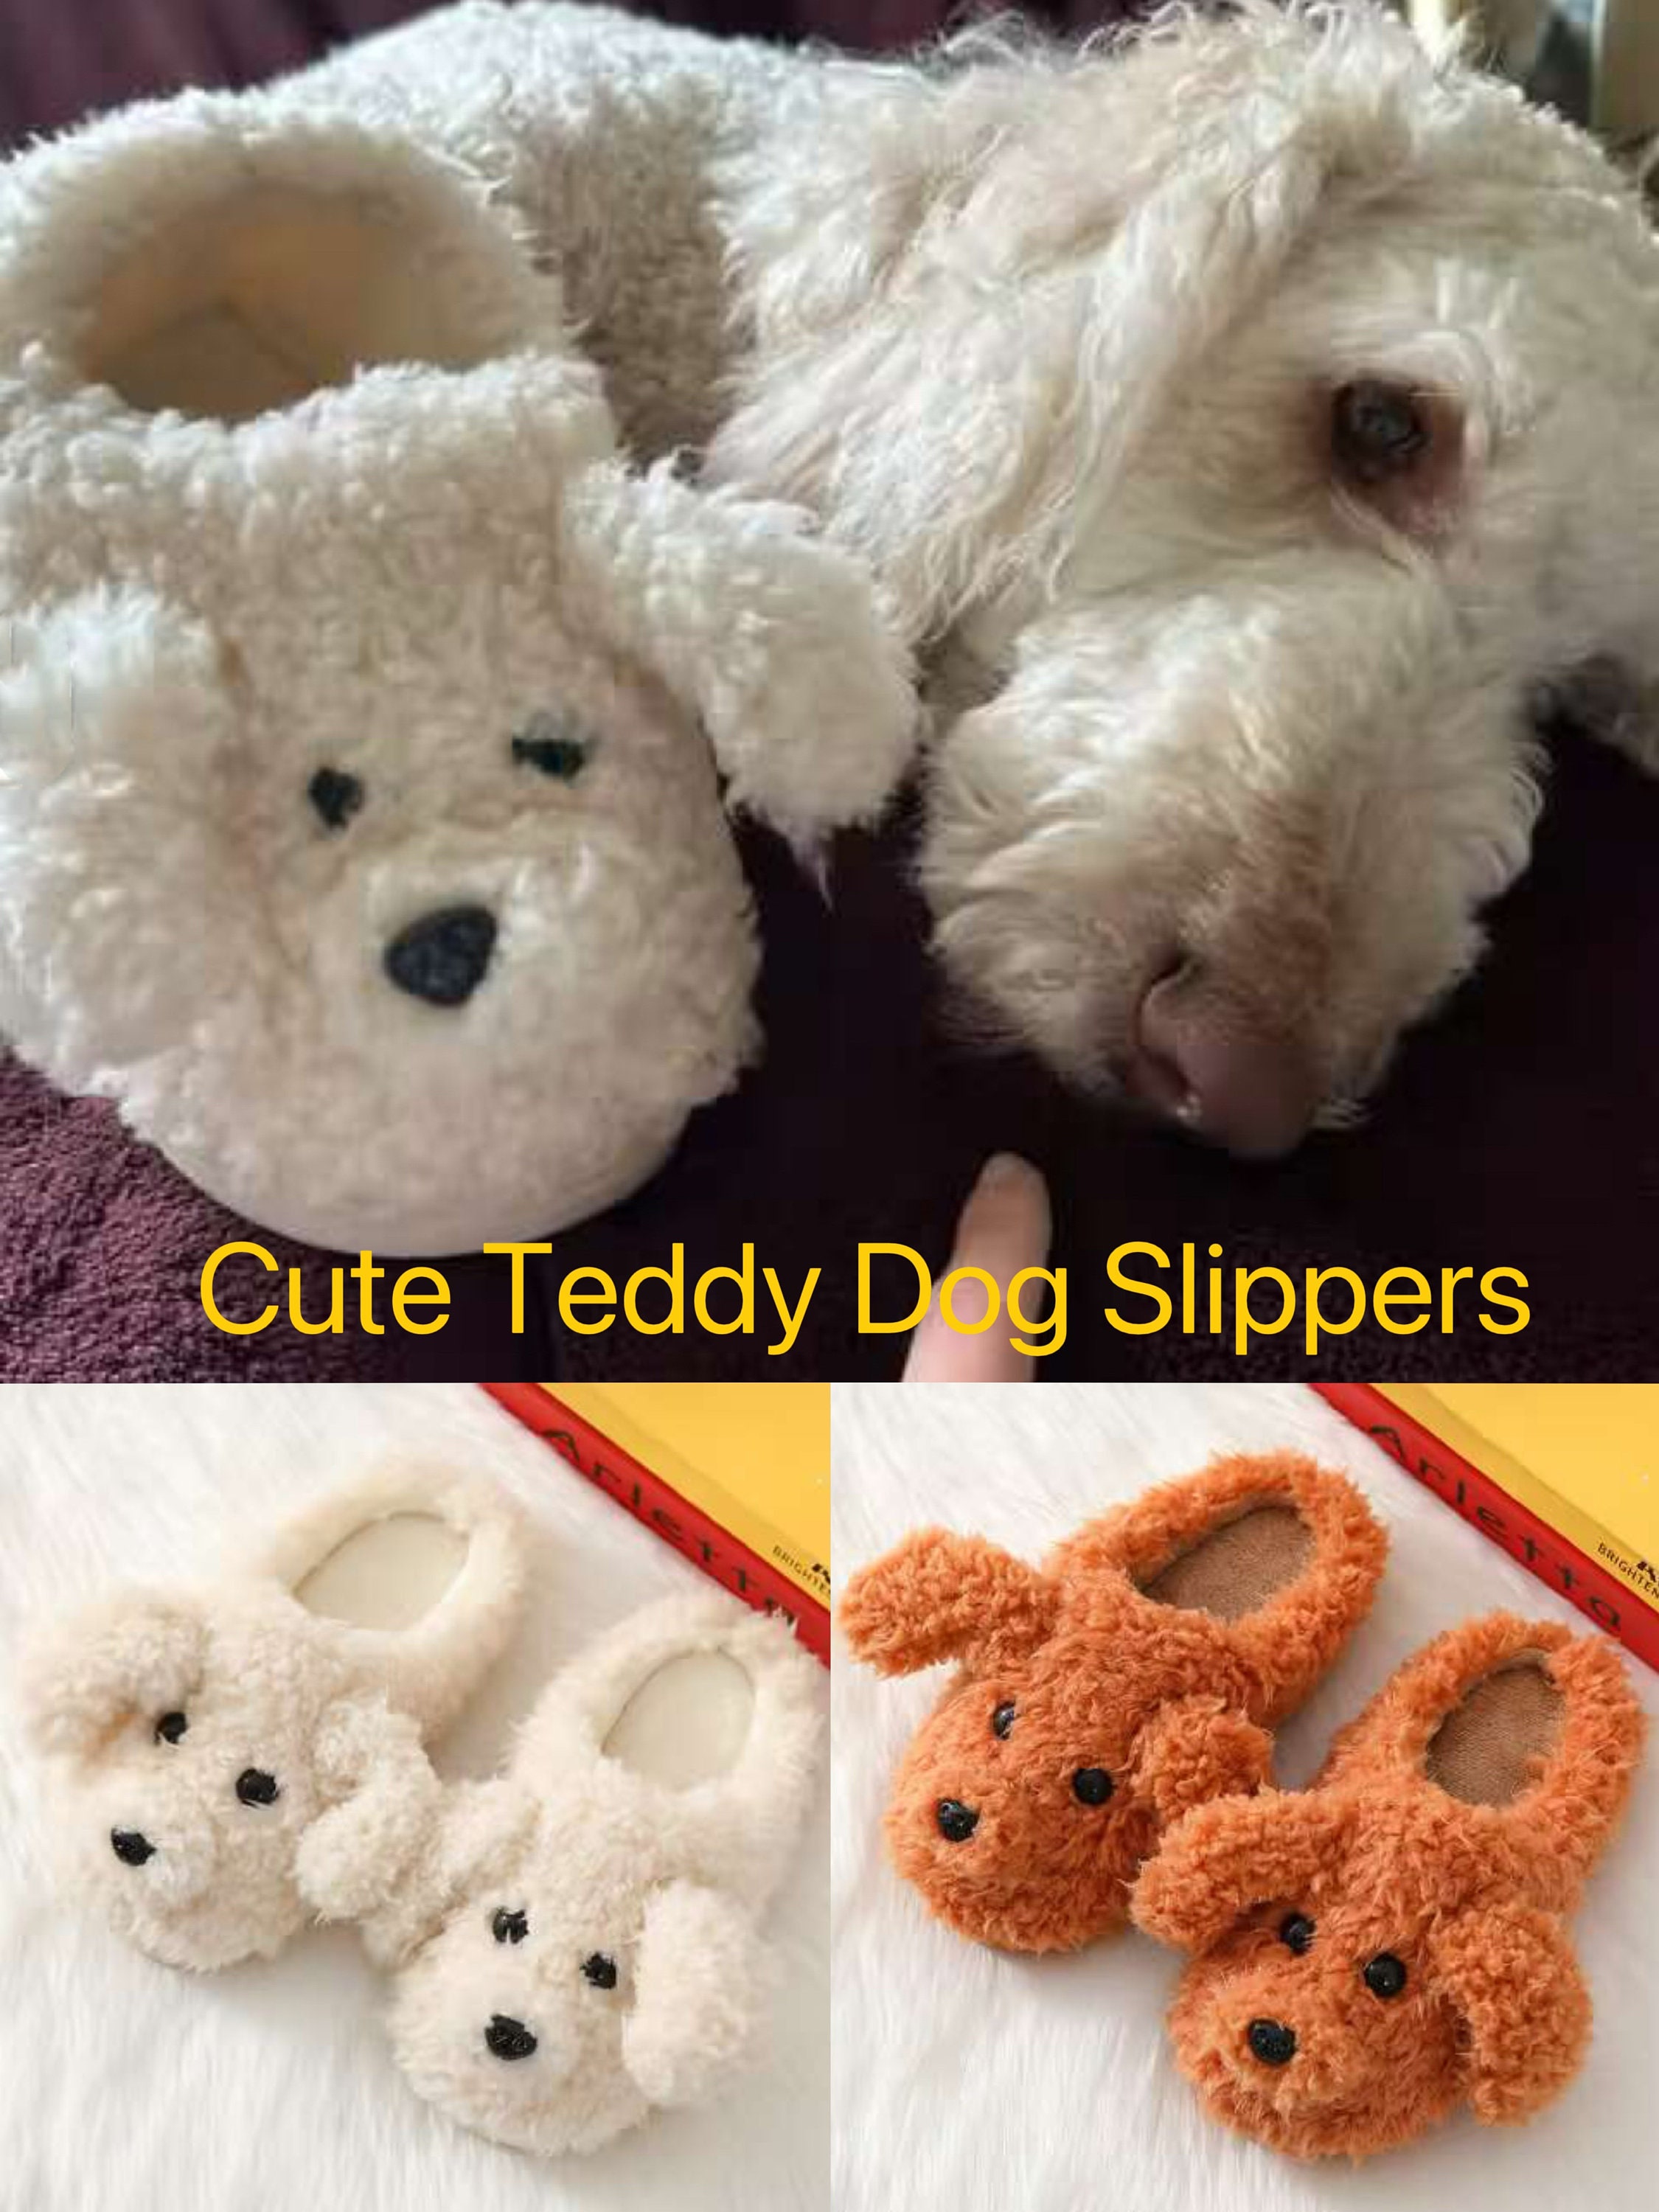 Cute-Short-Legs-Dog-Plush-Slippers-Indoor-Warm-Winter-Adult-Animal Slippers  Shoes for Sleeping - China Slippers Shoes and Animal Slippers price